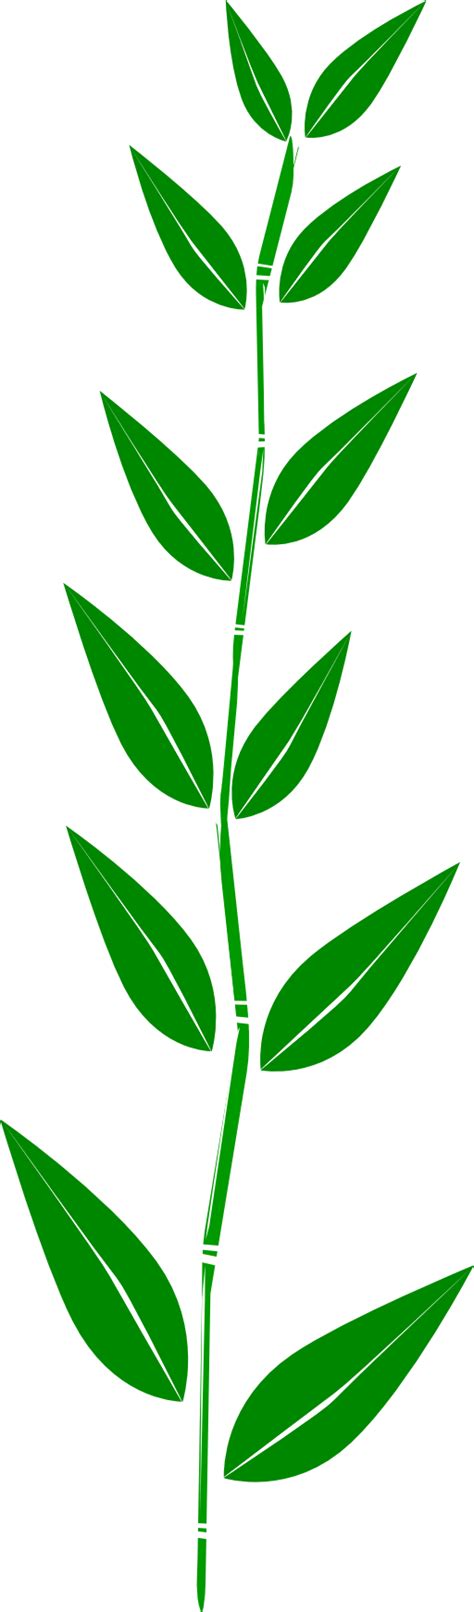 Green Leaf Clipart Clipart Image 10267